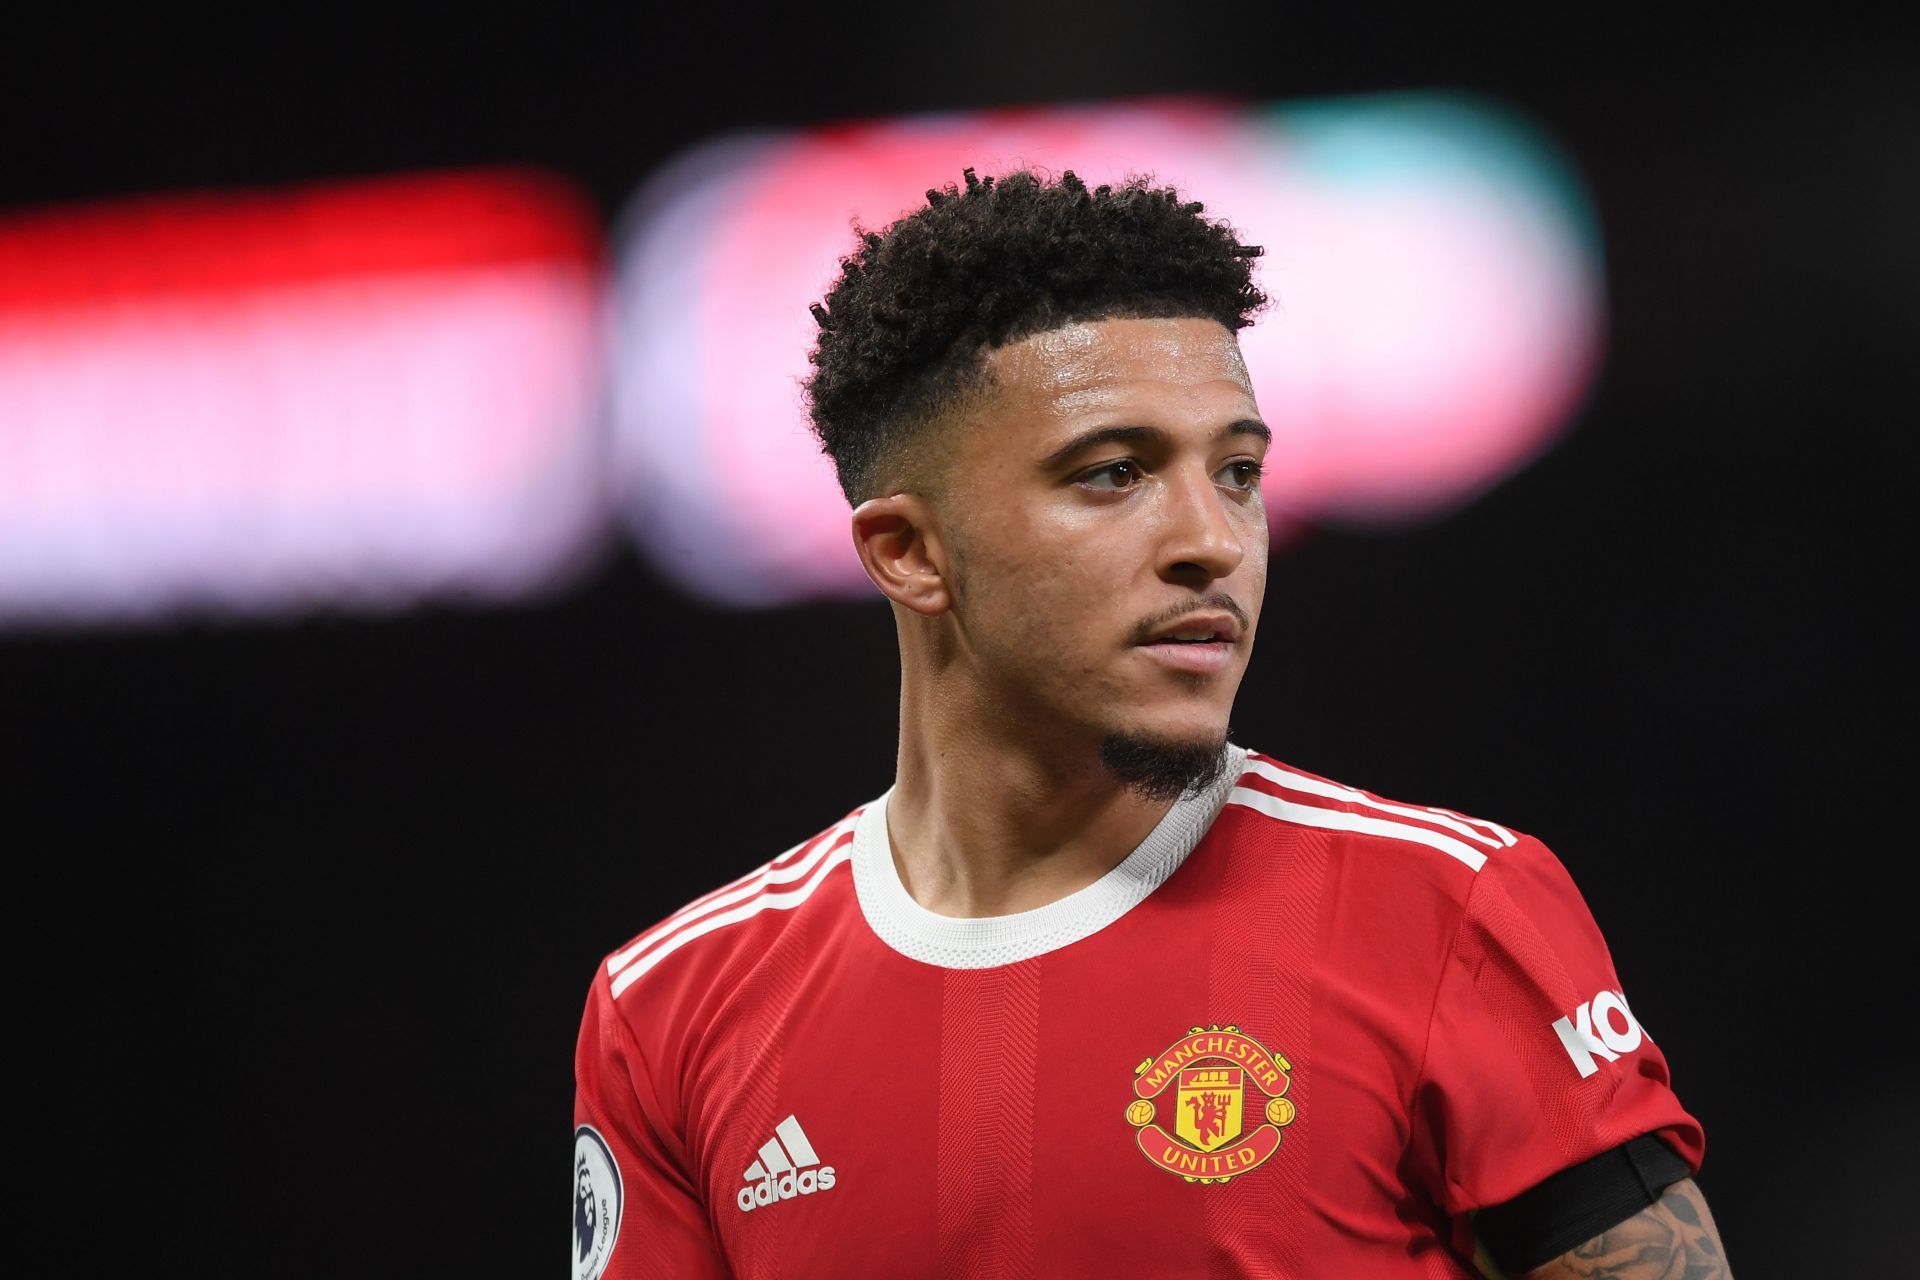 Jadon Sancho is finding his feet at Manchester United